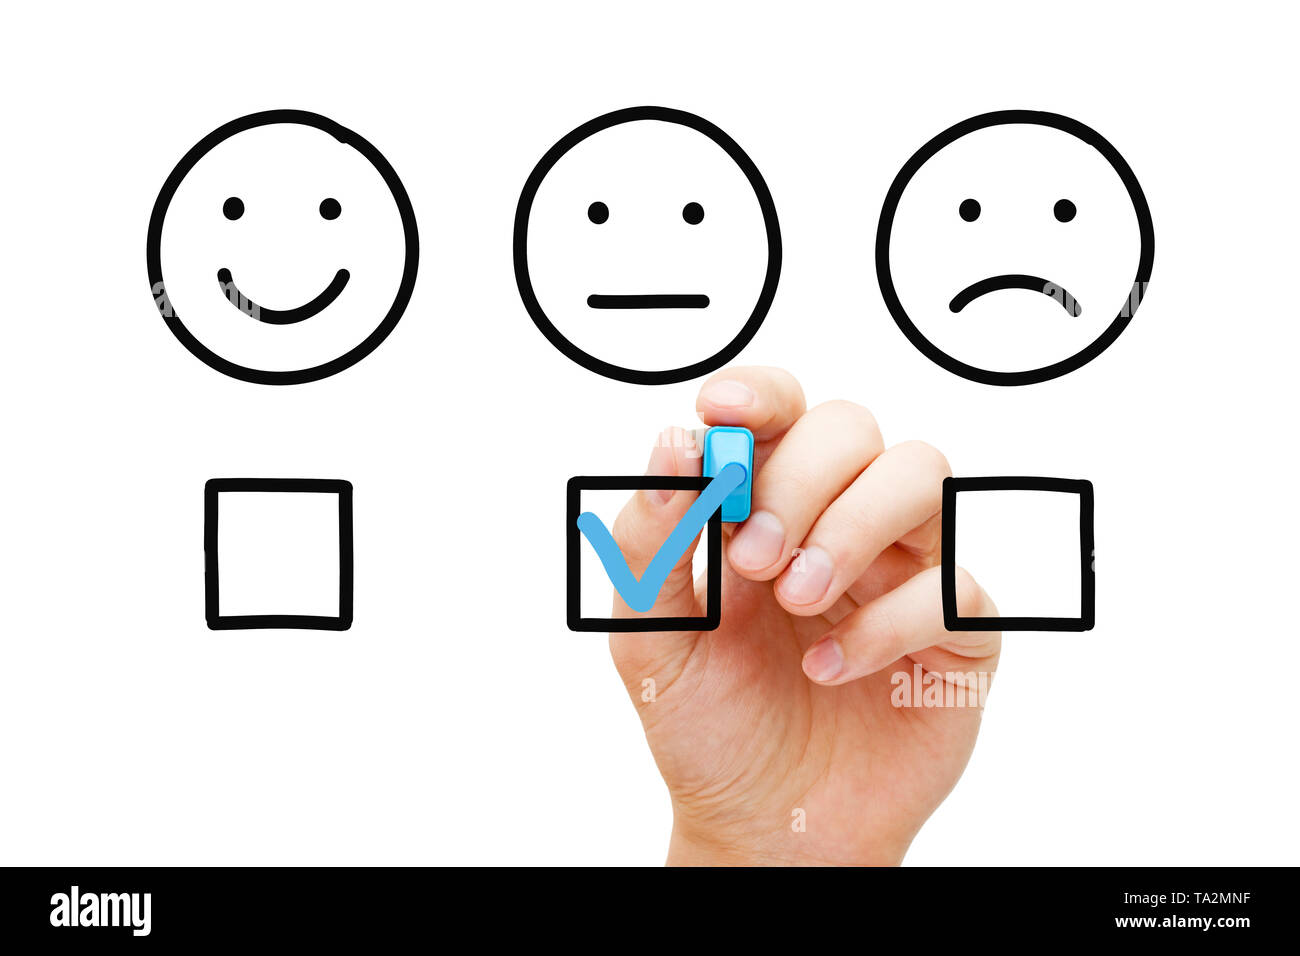 Client leaving average rating with blue marker on customer feedback evaluation form. Drawn faces survey concept. Stock Photo